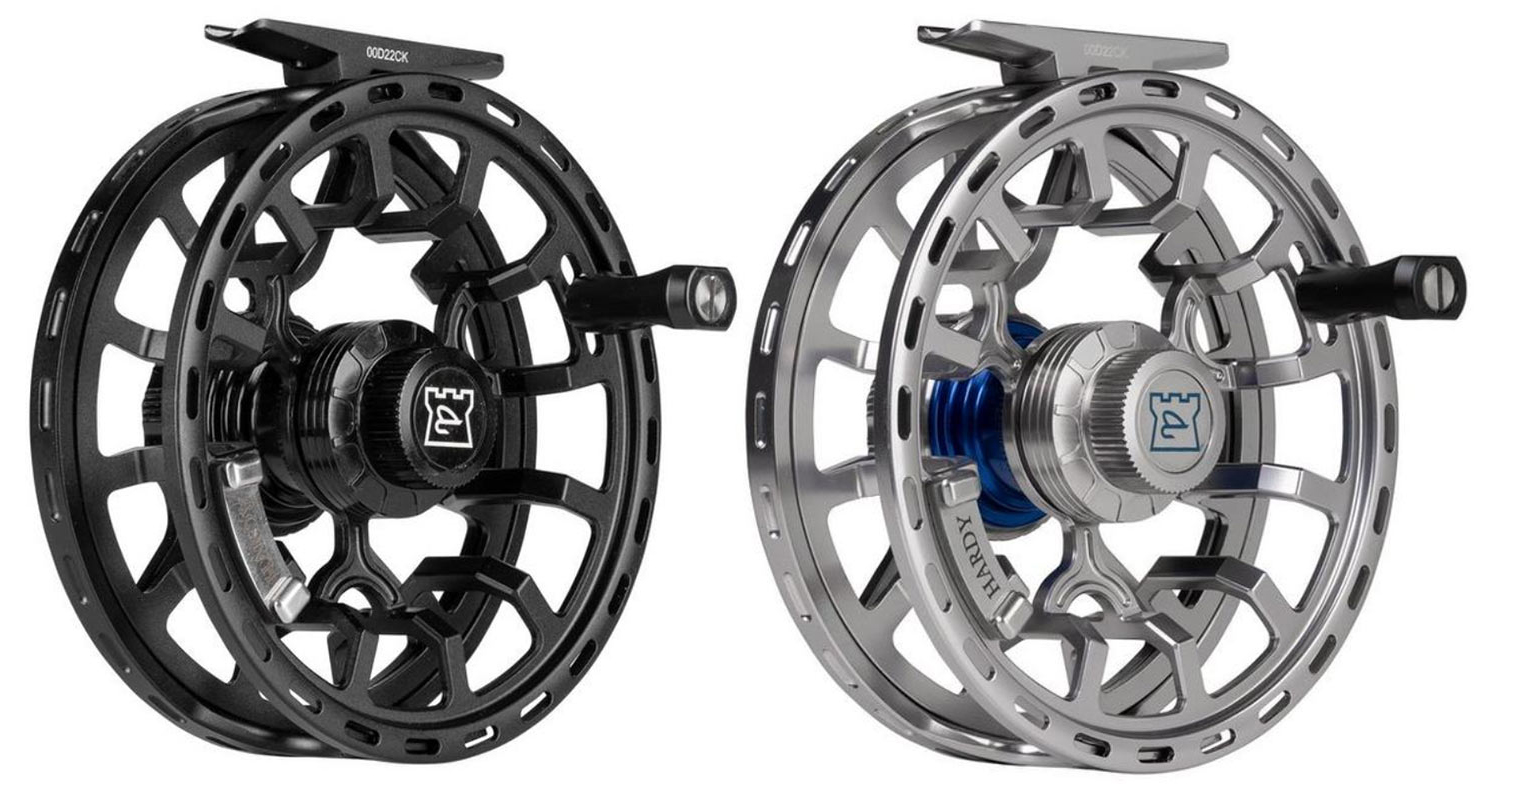 Hardy Ultralite 4000 CC large arbor fly reel, black silver mint with case